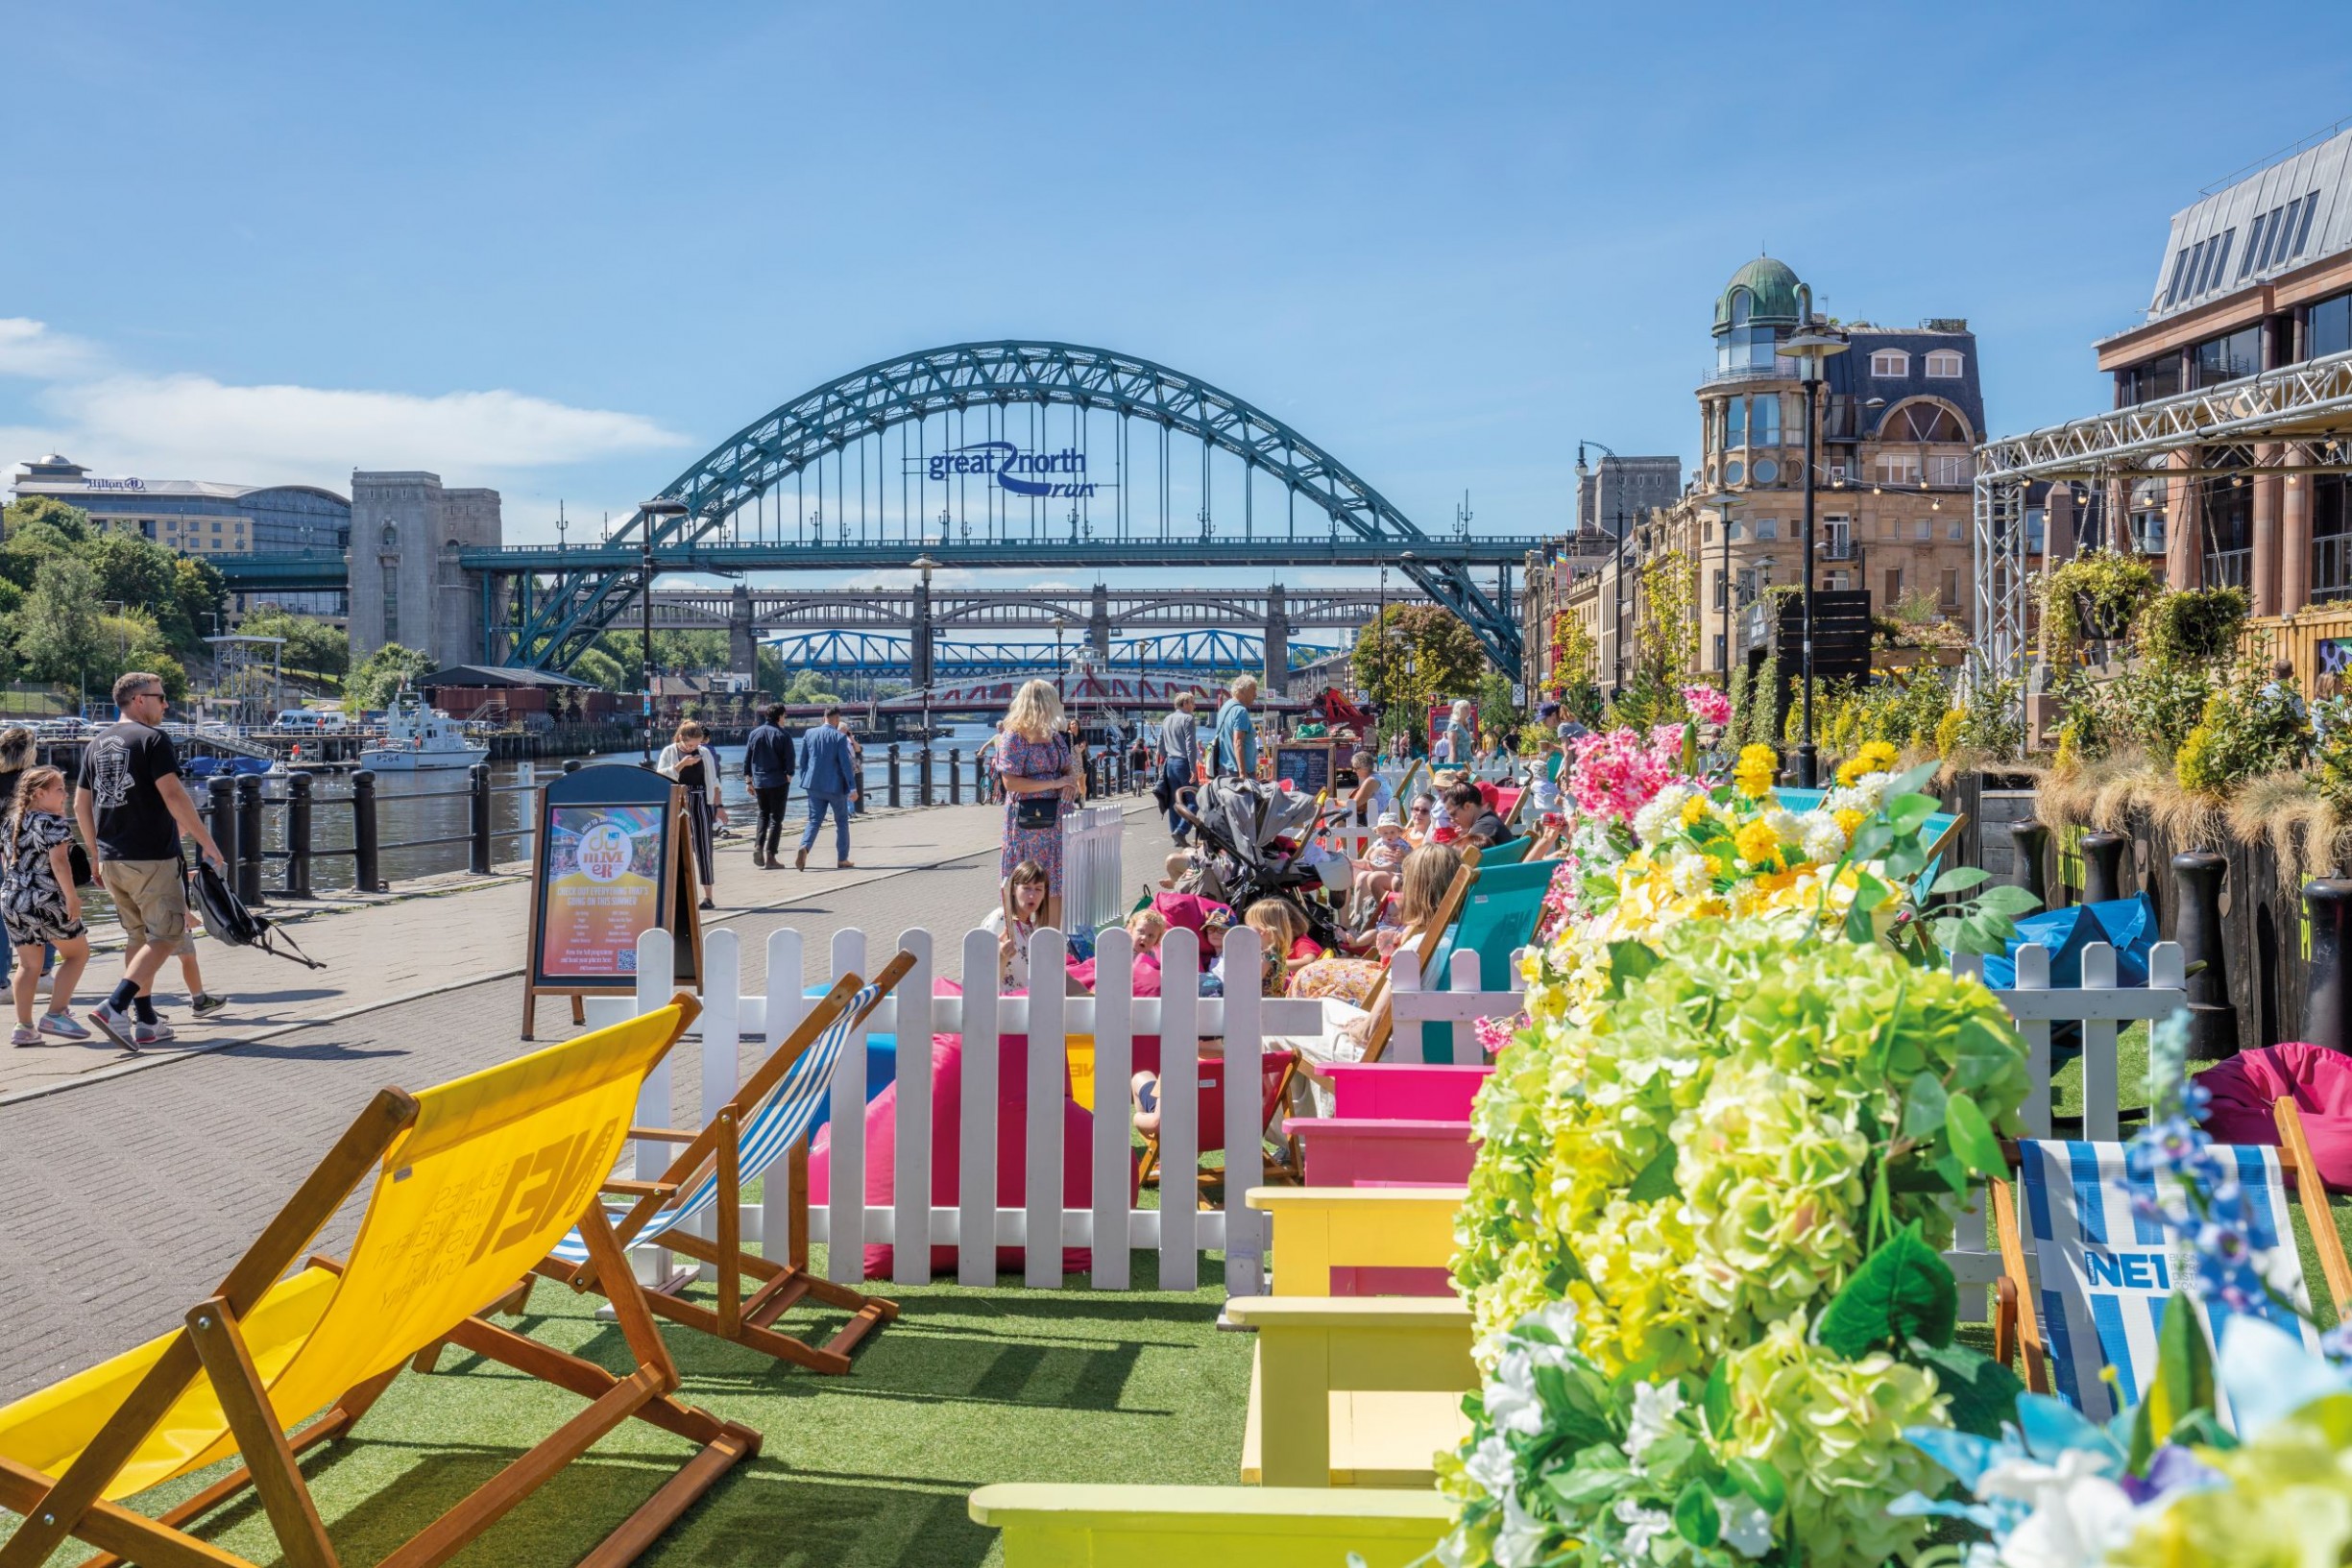 NE1's Summer in the City events on Newcastle's Quayside